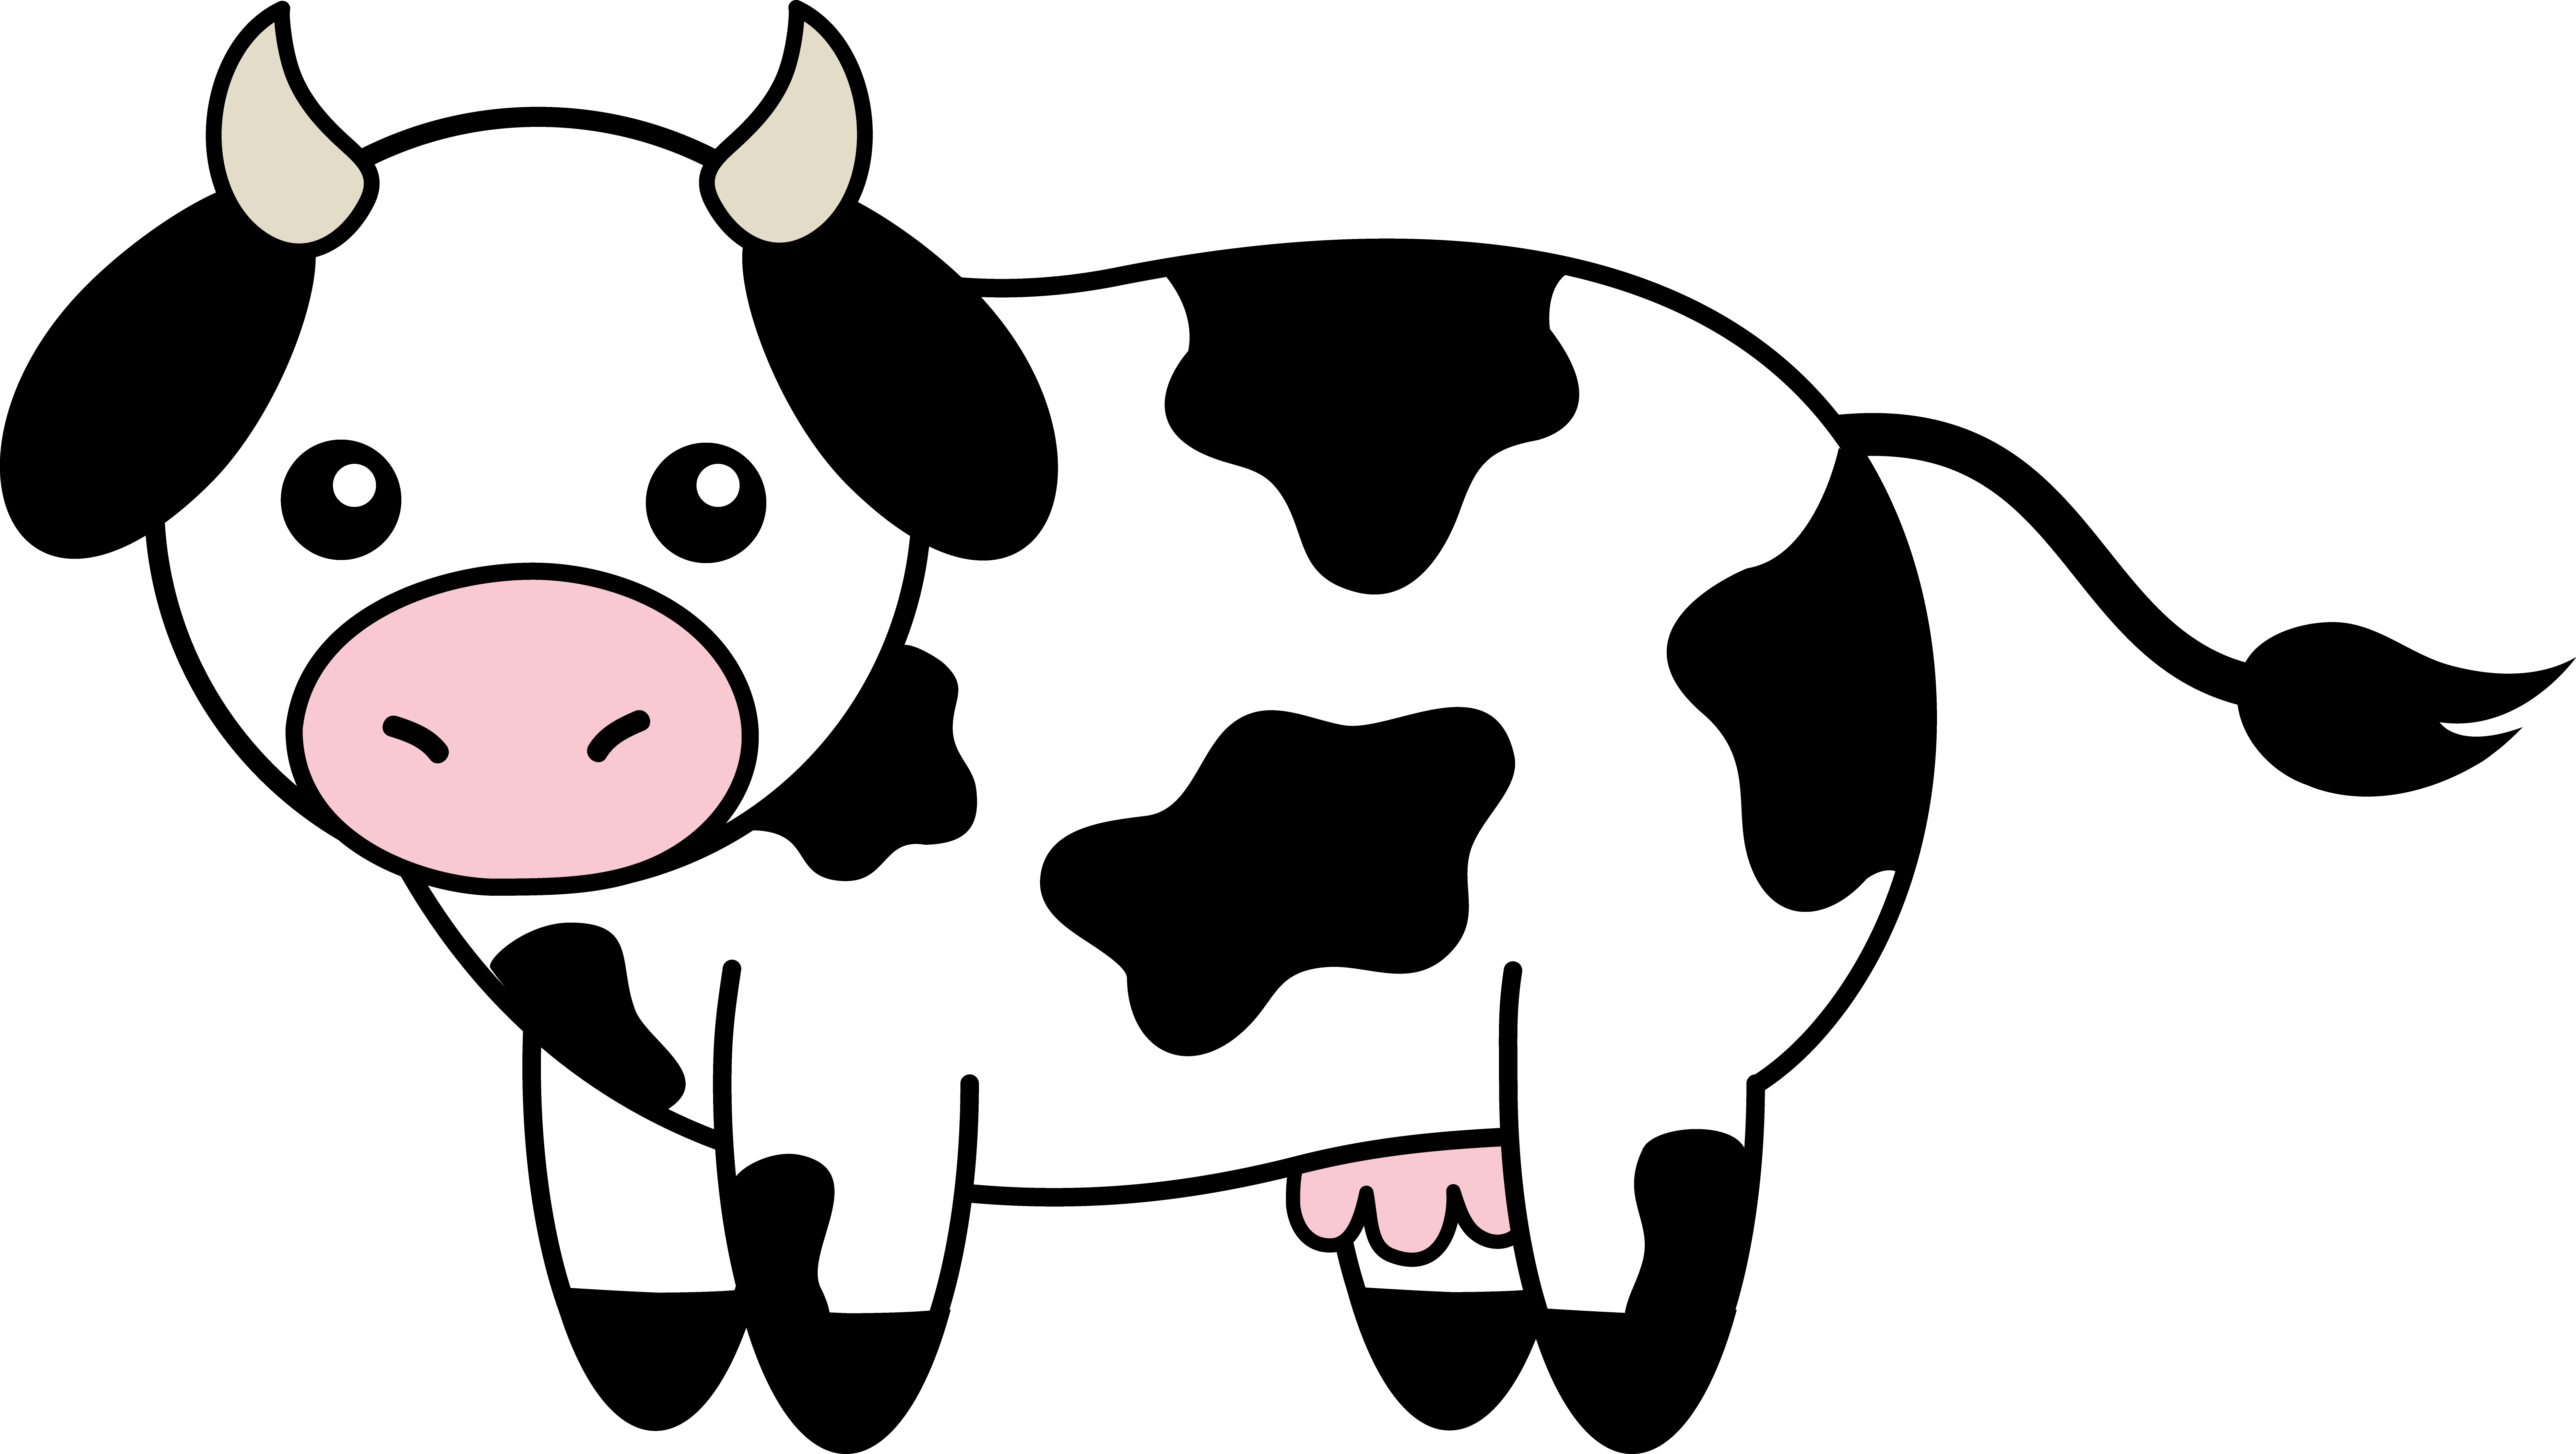 Cute Cartoon Pictures Of Cows - ClipArt Best